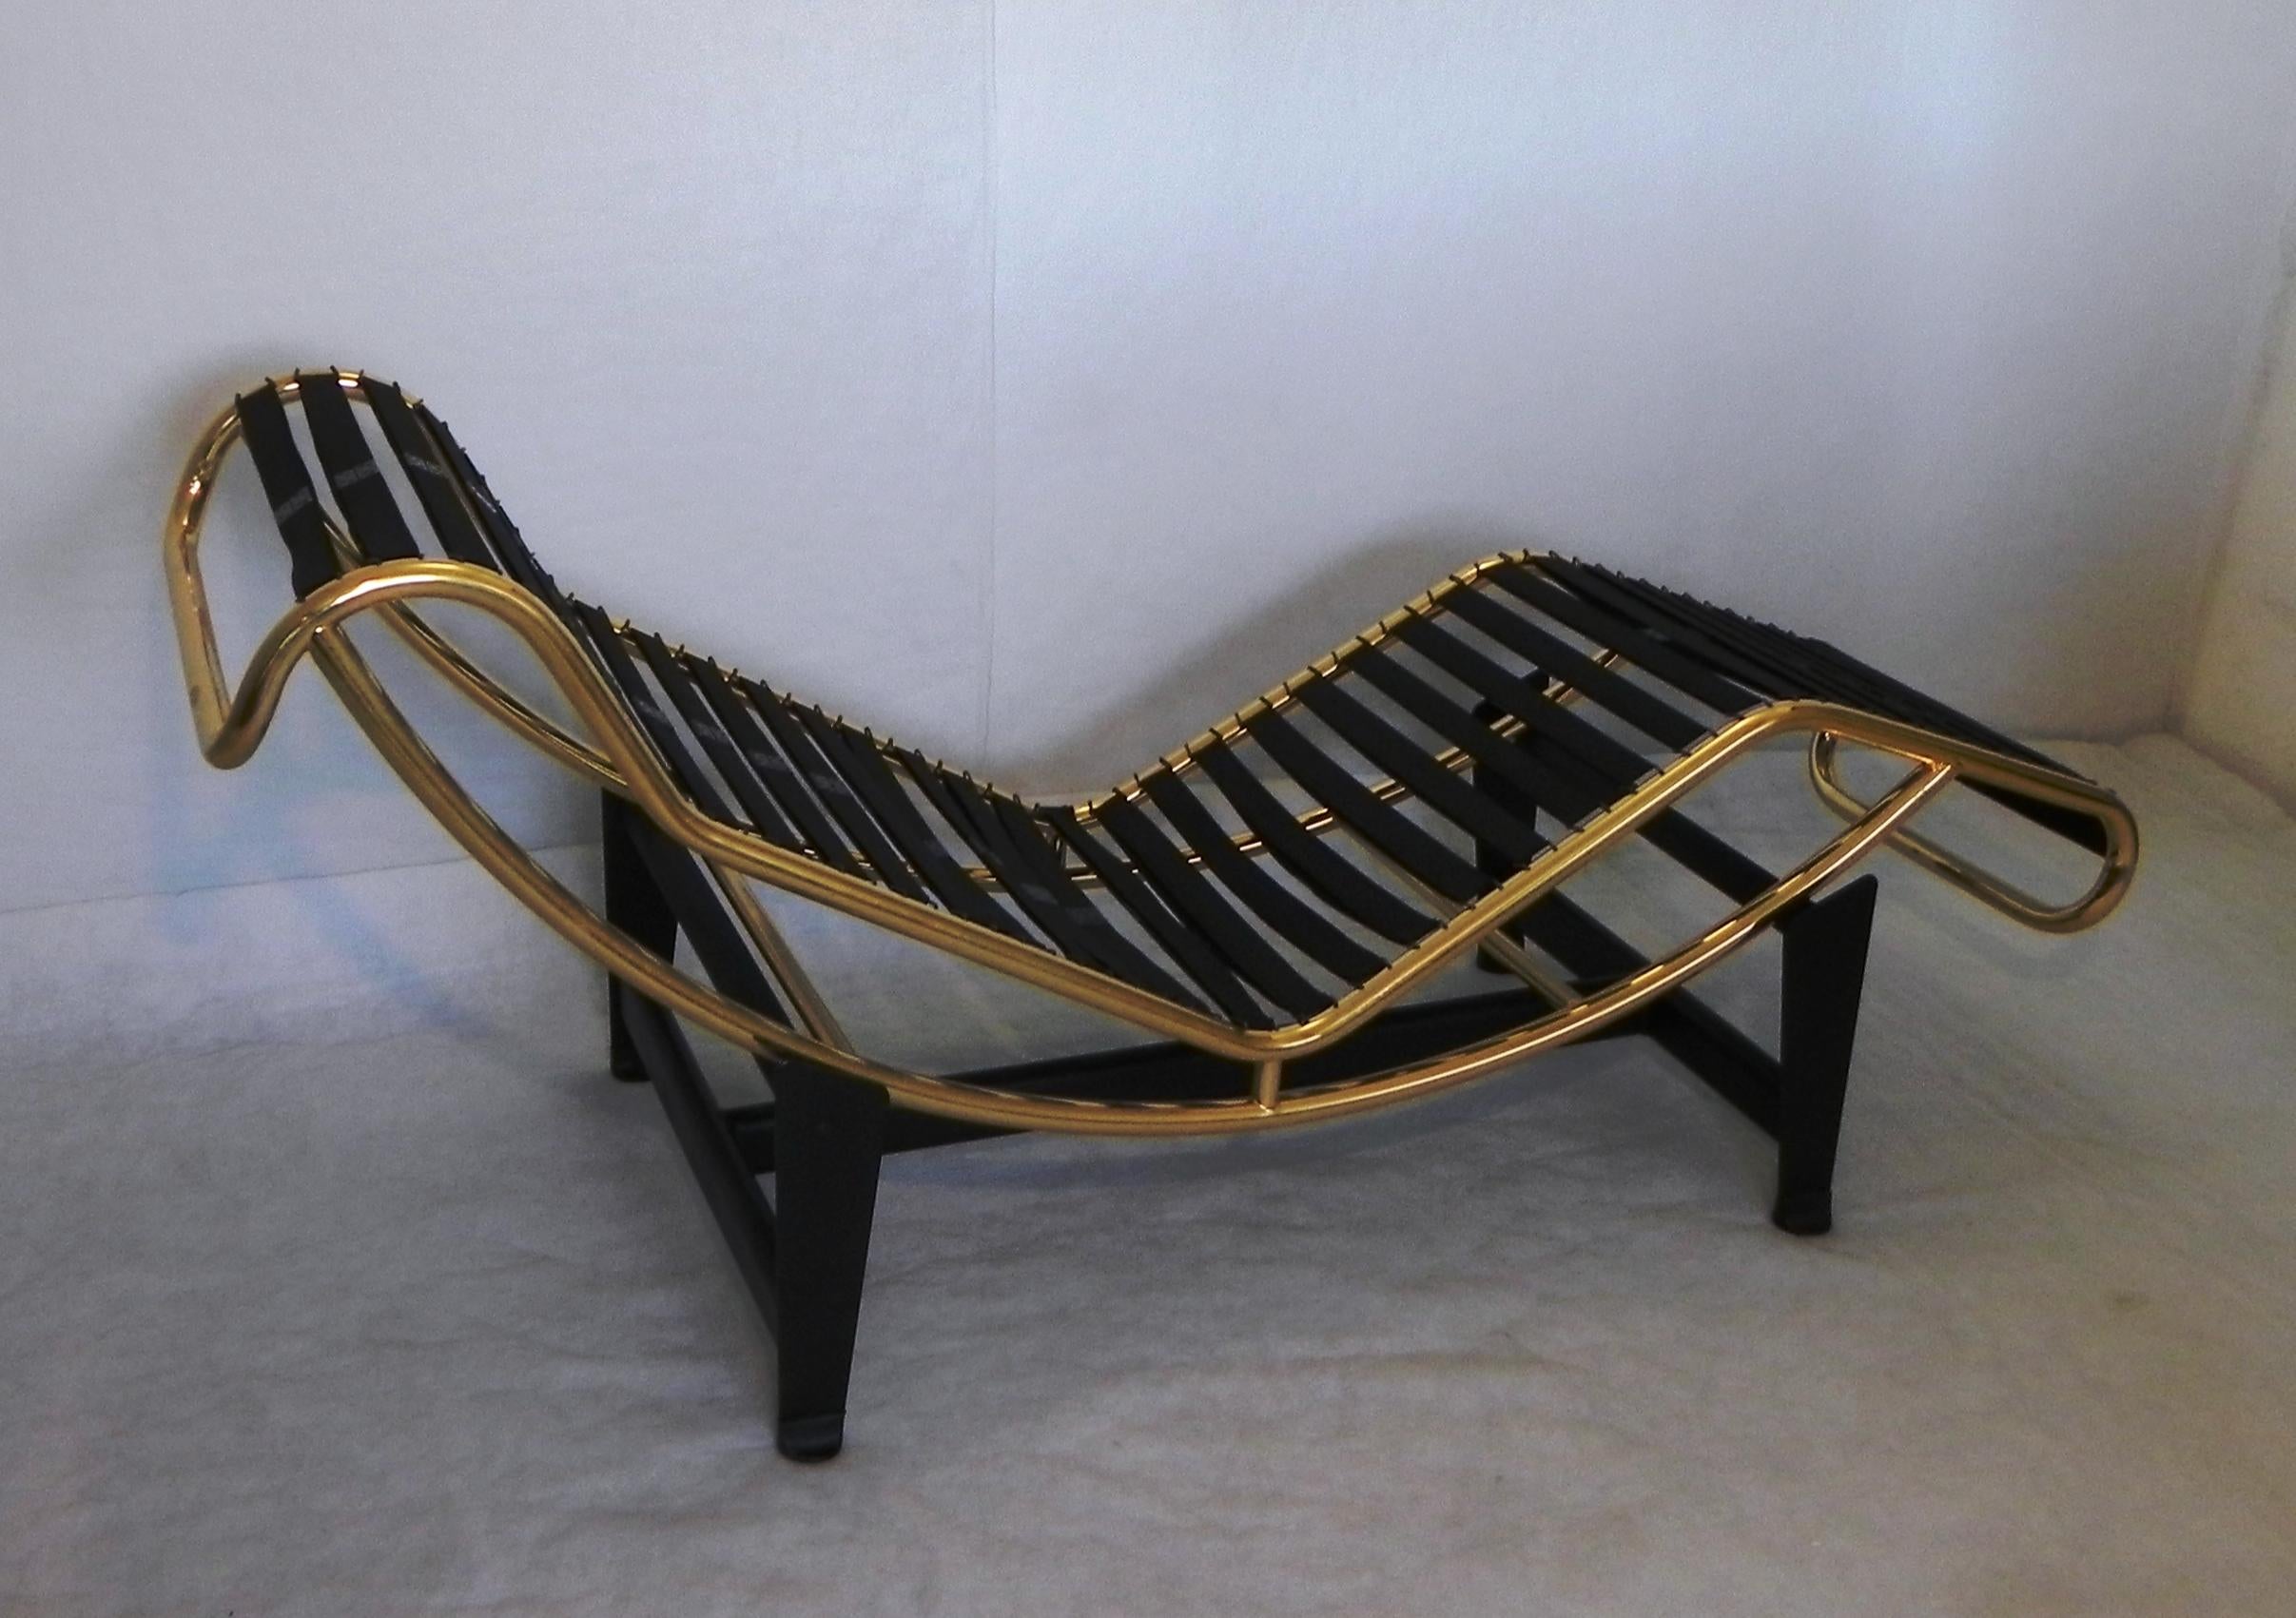 Chaise Longue, limited edition - Gold In Good Condition For Sale In Felino, IT